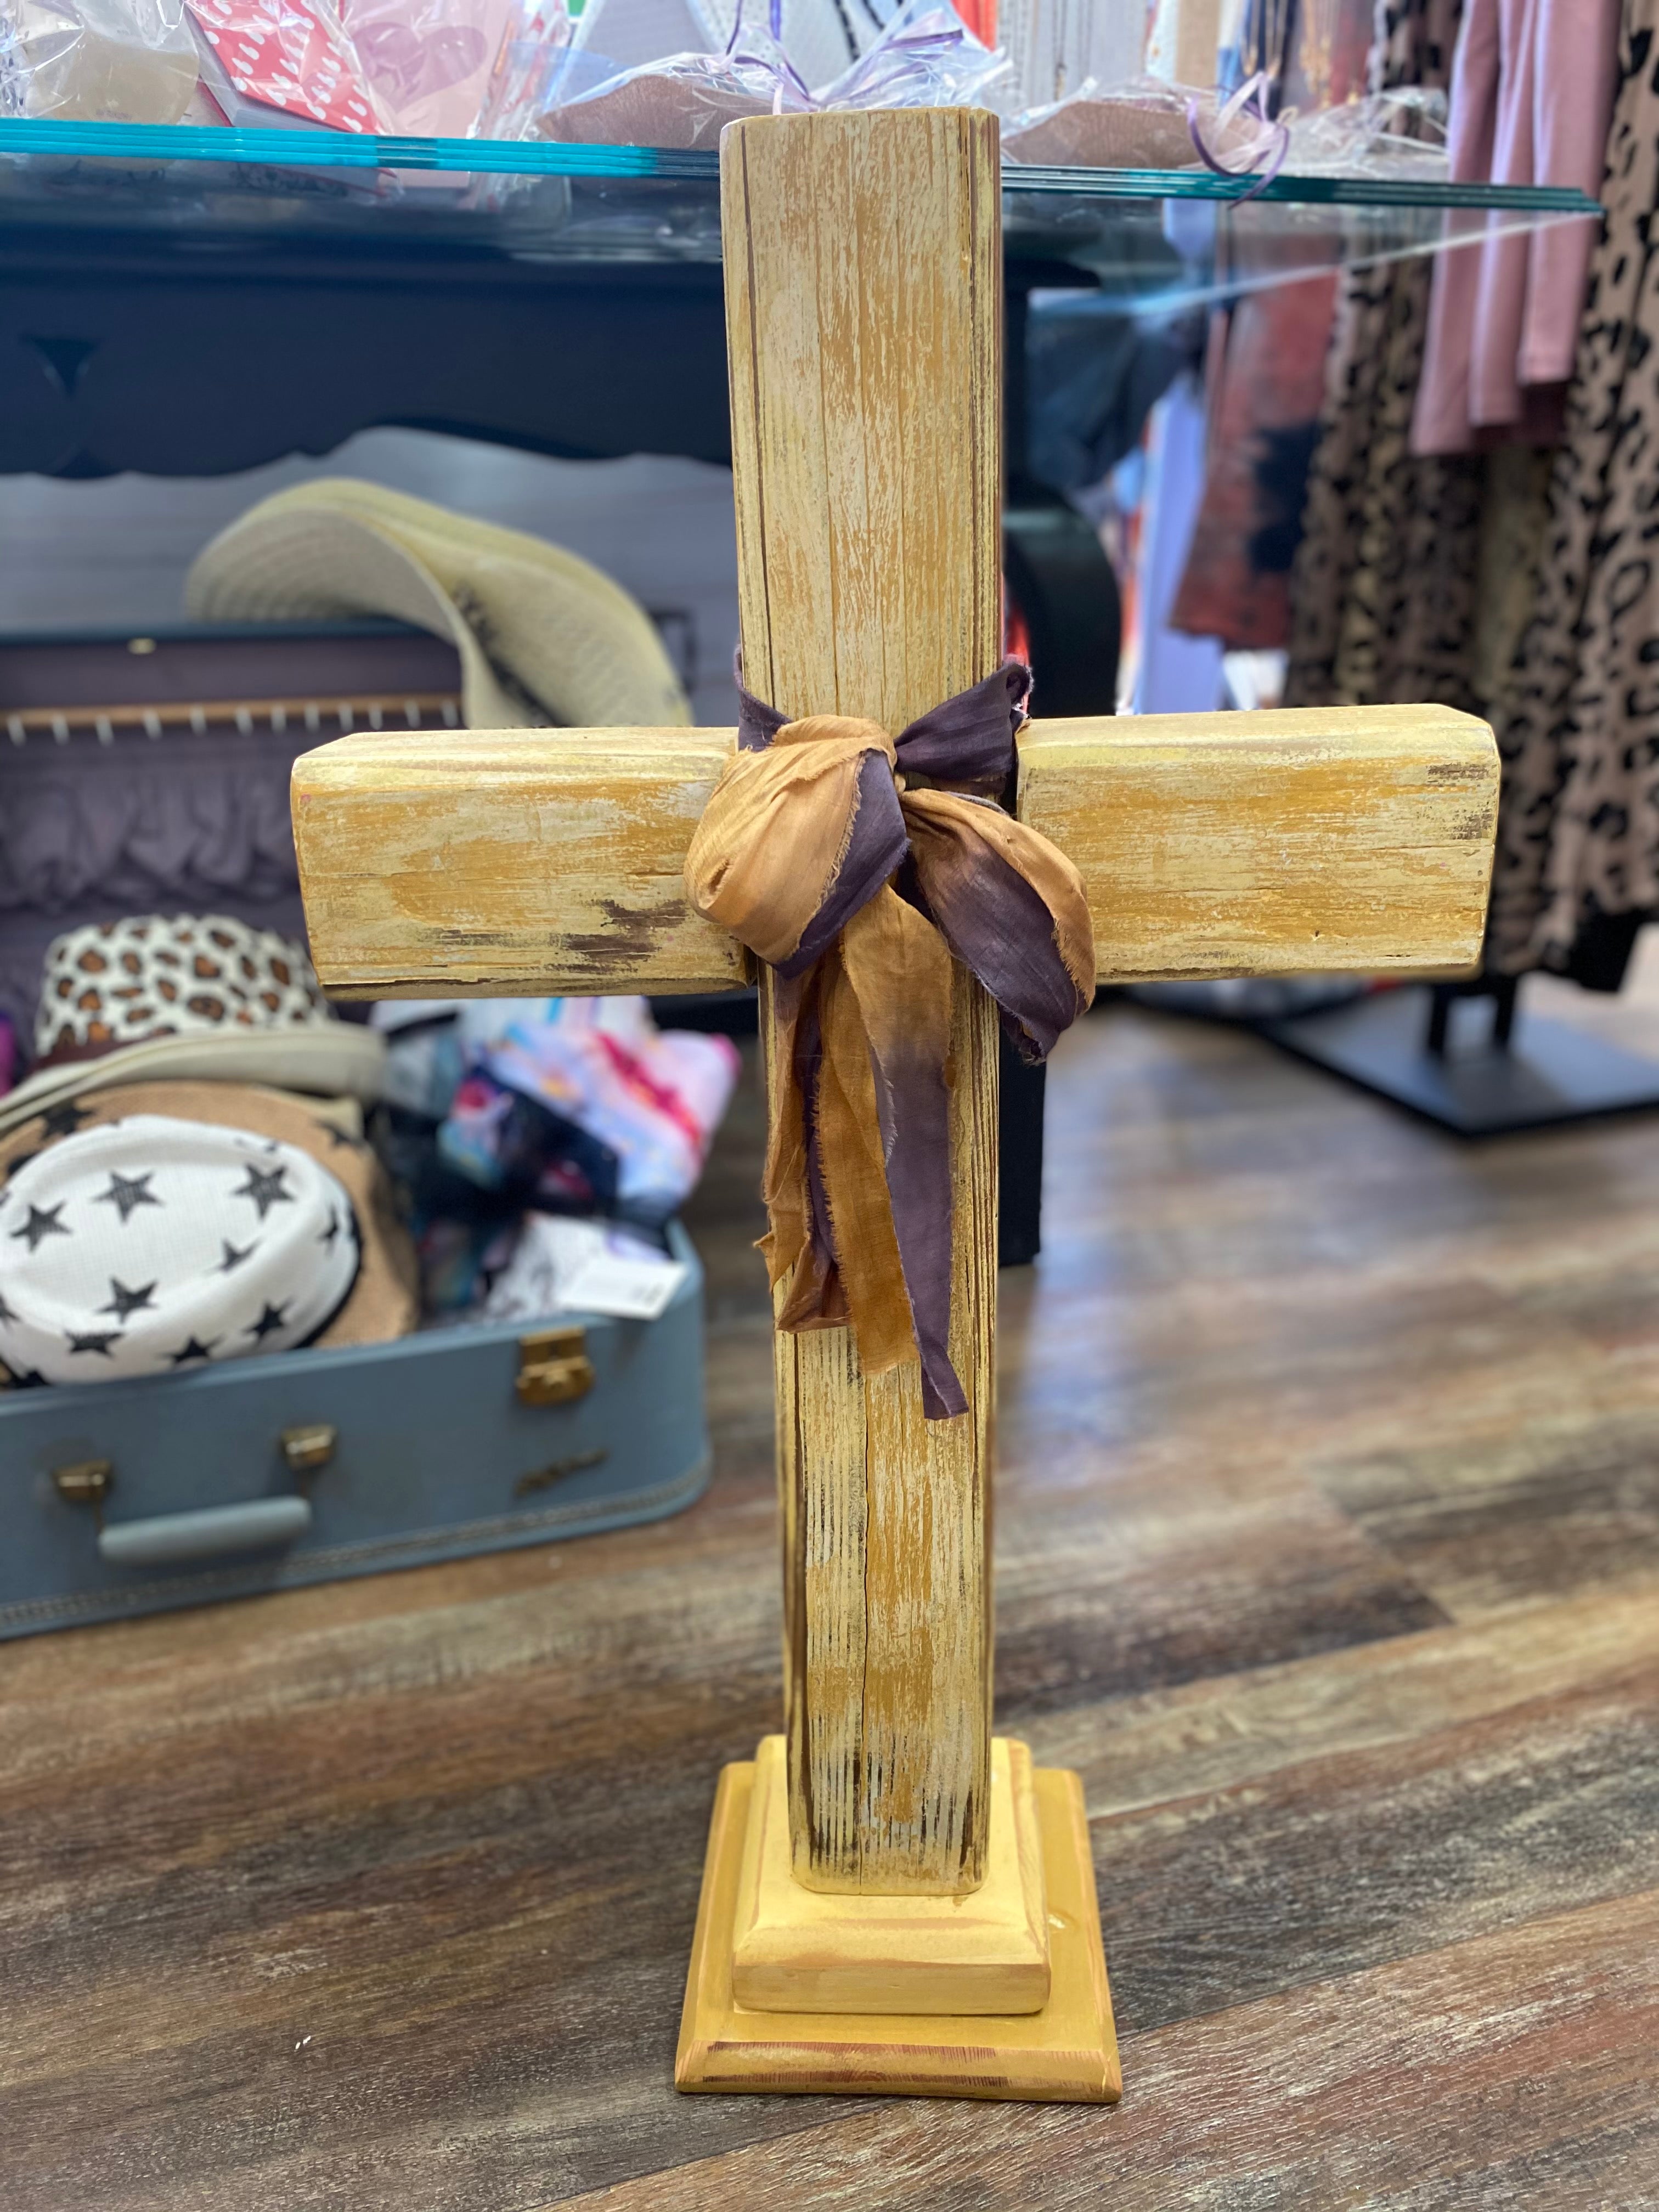 “Golden Opportunity” Handcrafted Wood Cross